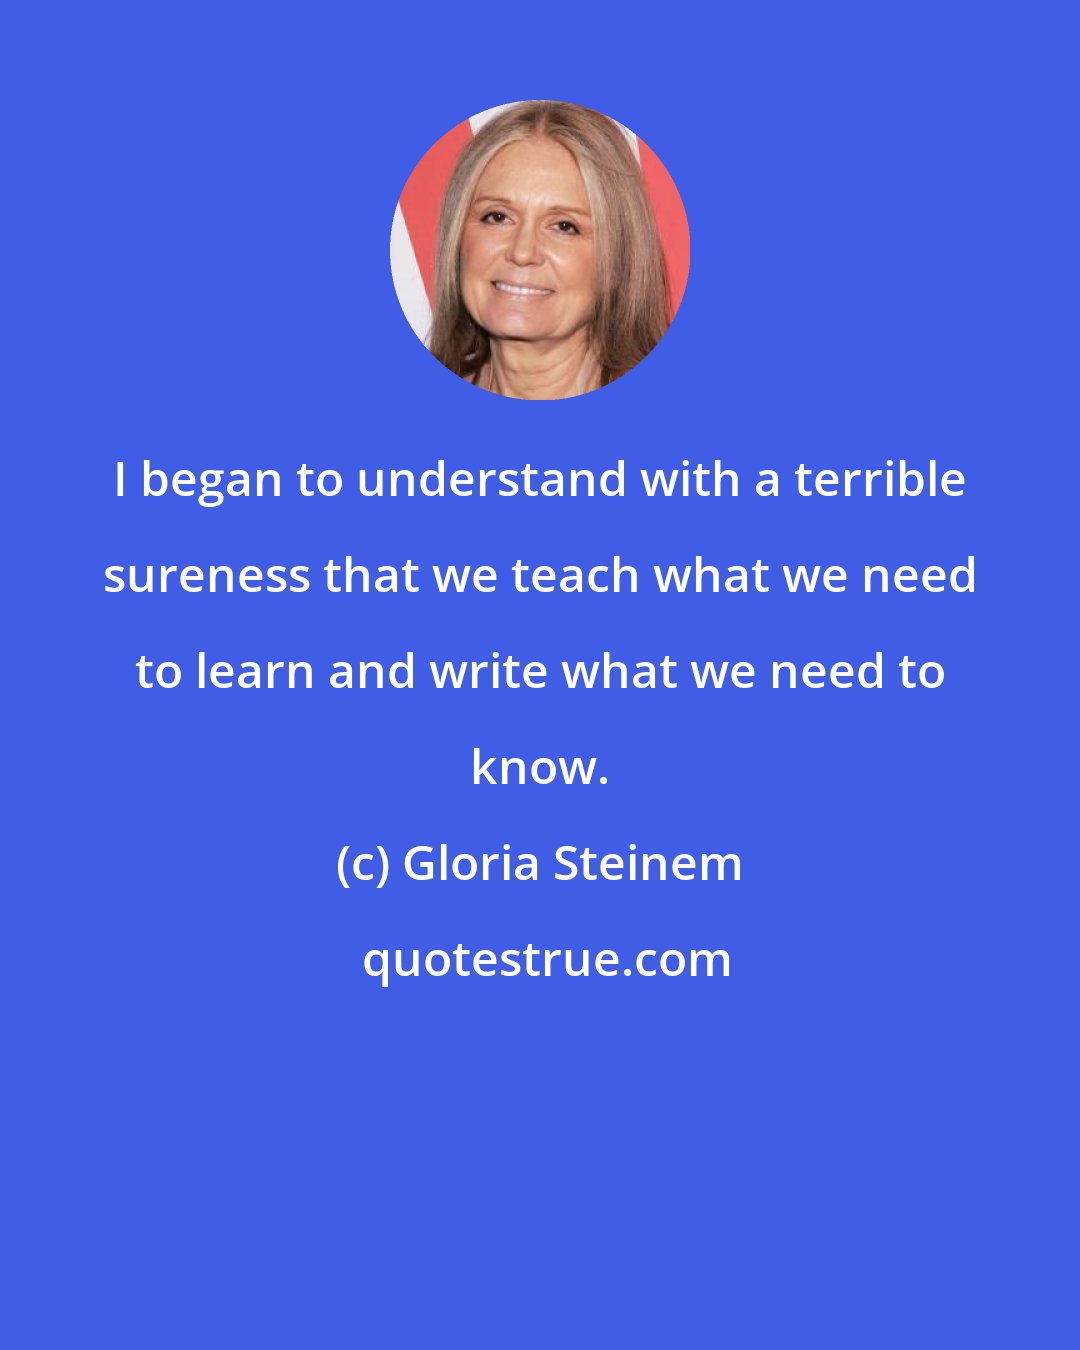 Gloria Steinem: I began to understand with a terrible sureness that we teach what we need to learn and write what we need to know.